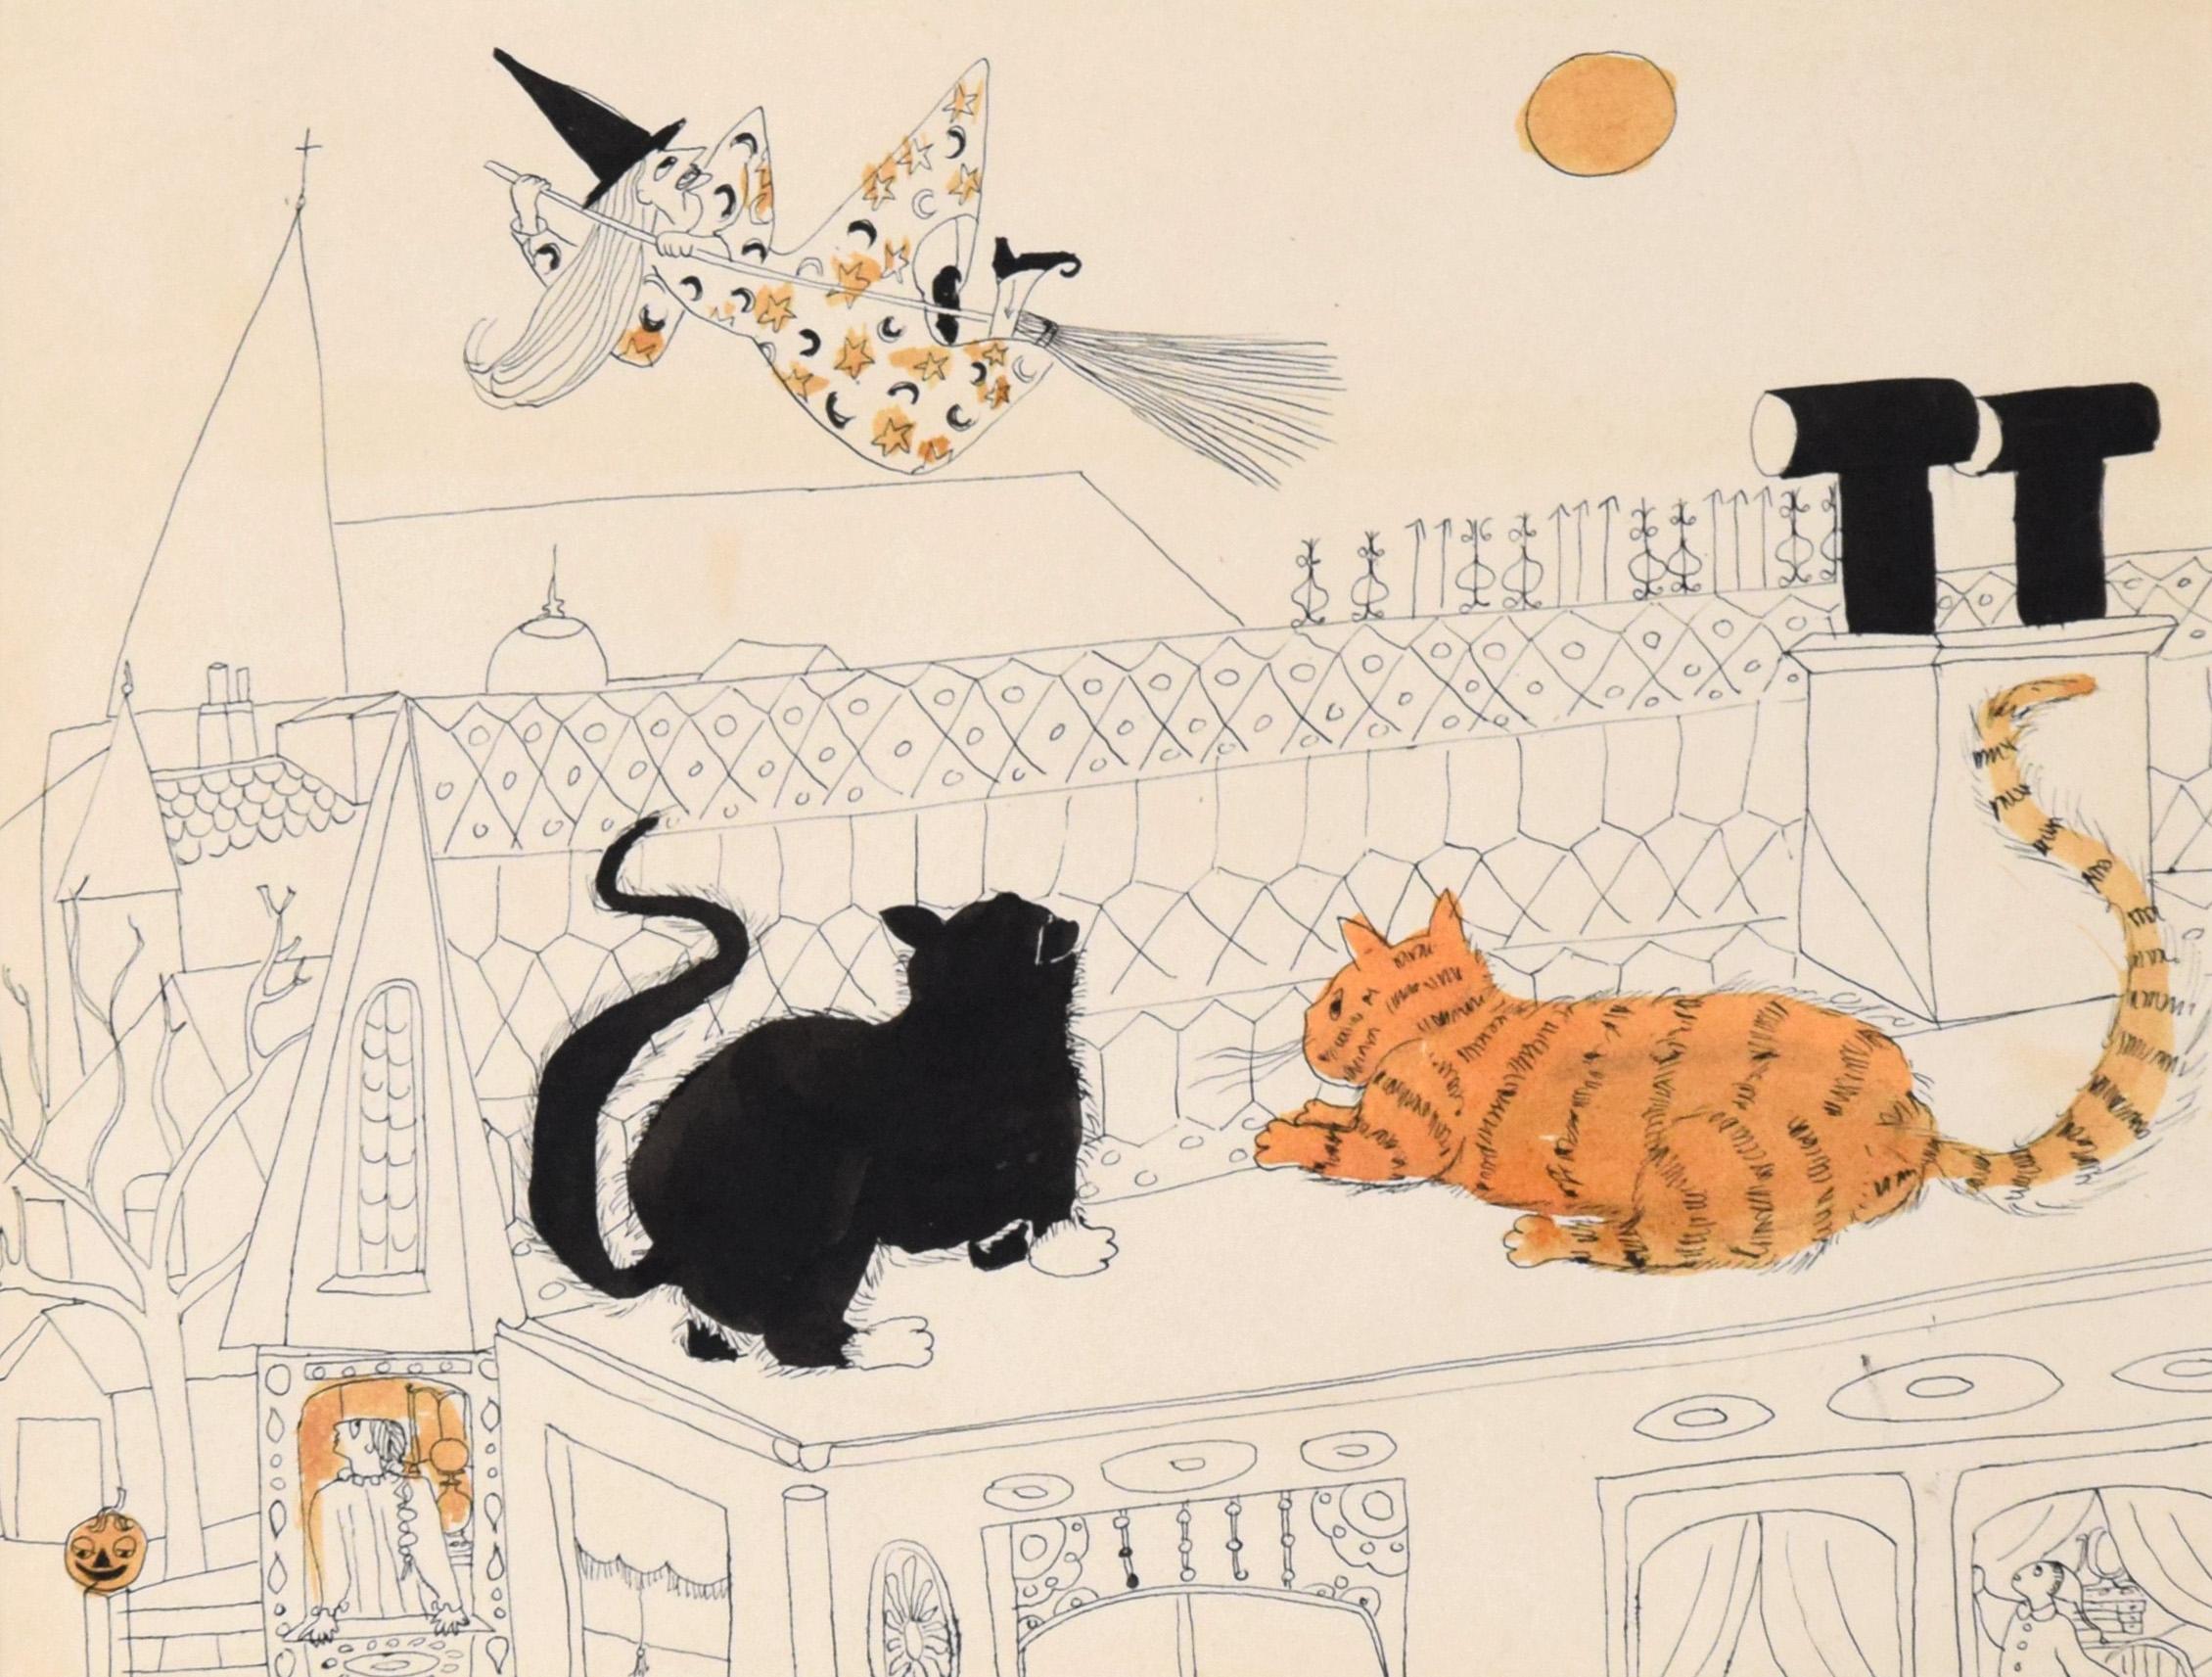 Cats Watching a Witch on a Broomstick - Vintage Halloween Illustration in Ink - Art by Irene Pattinson